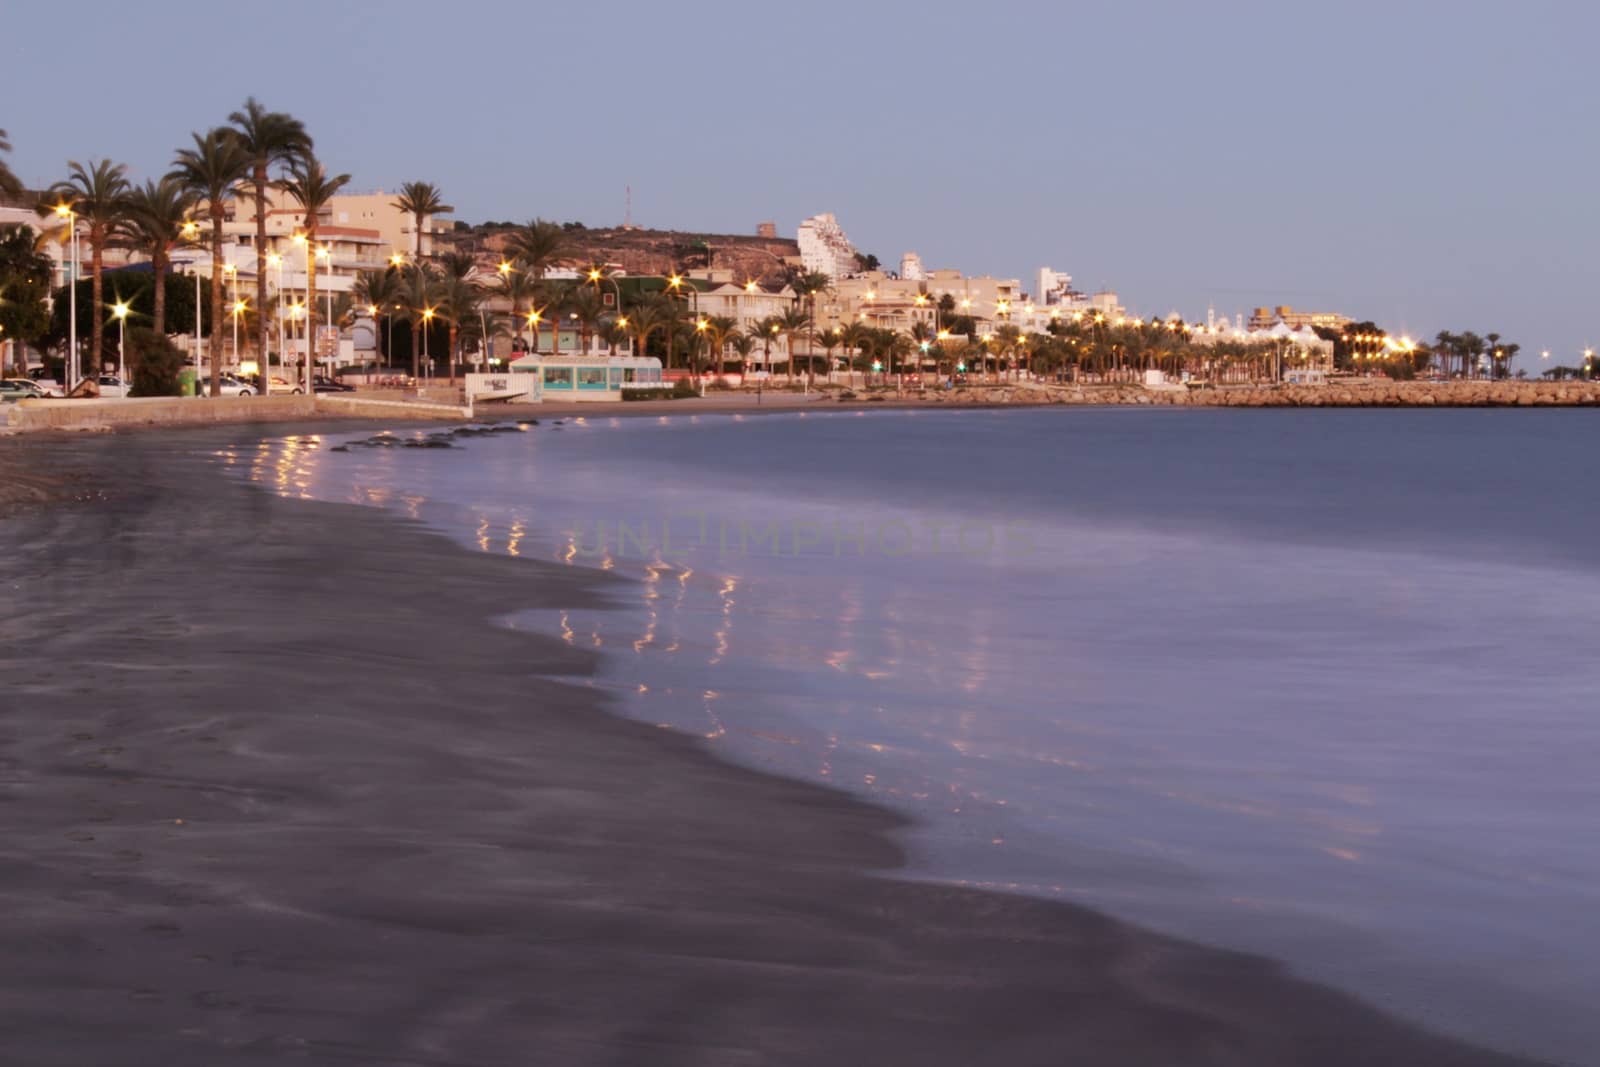 Beach at sunset in Southern Spain